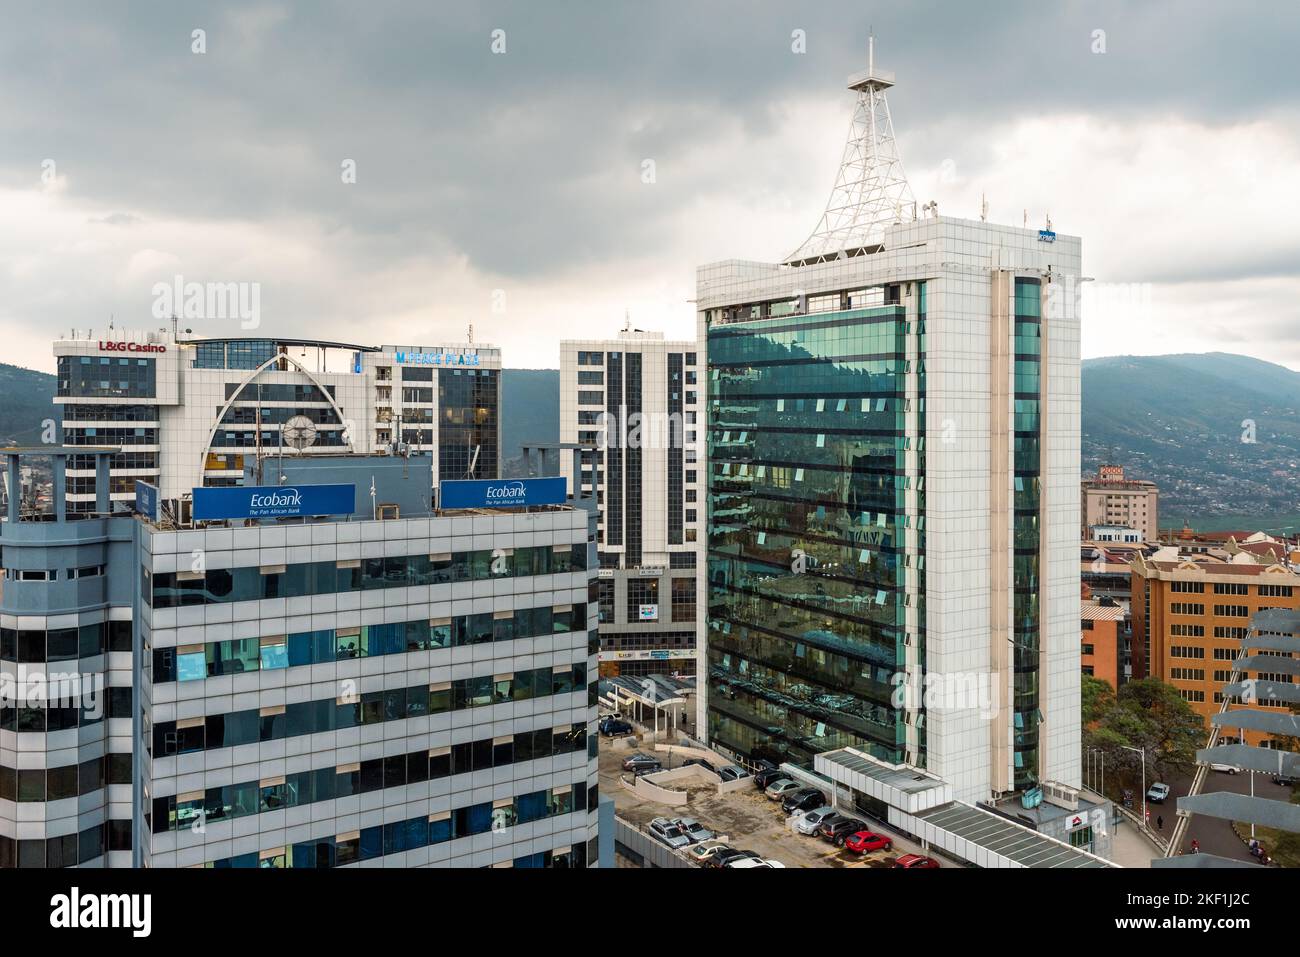 Kigali, Rwanda - August 17 2022: Ecobank, Grand Pension Plaza, Peace Plaza and other buildings in downtown Kigali on a stormy day. Stock Photo